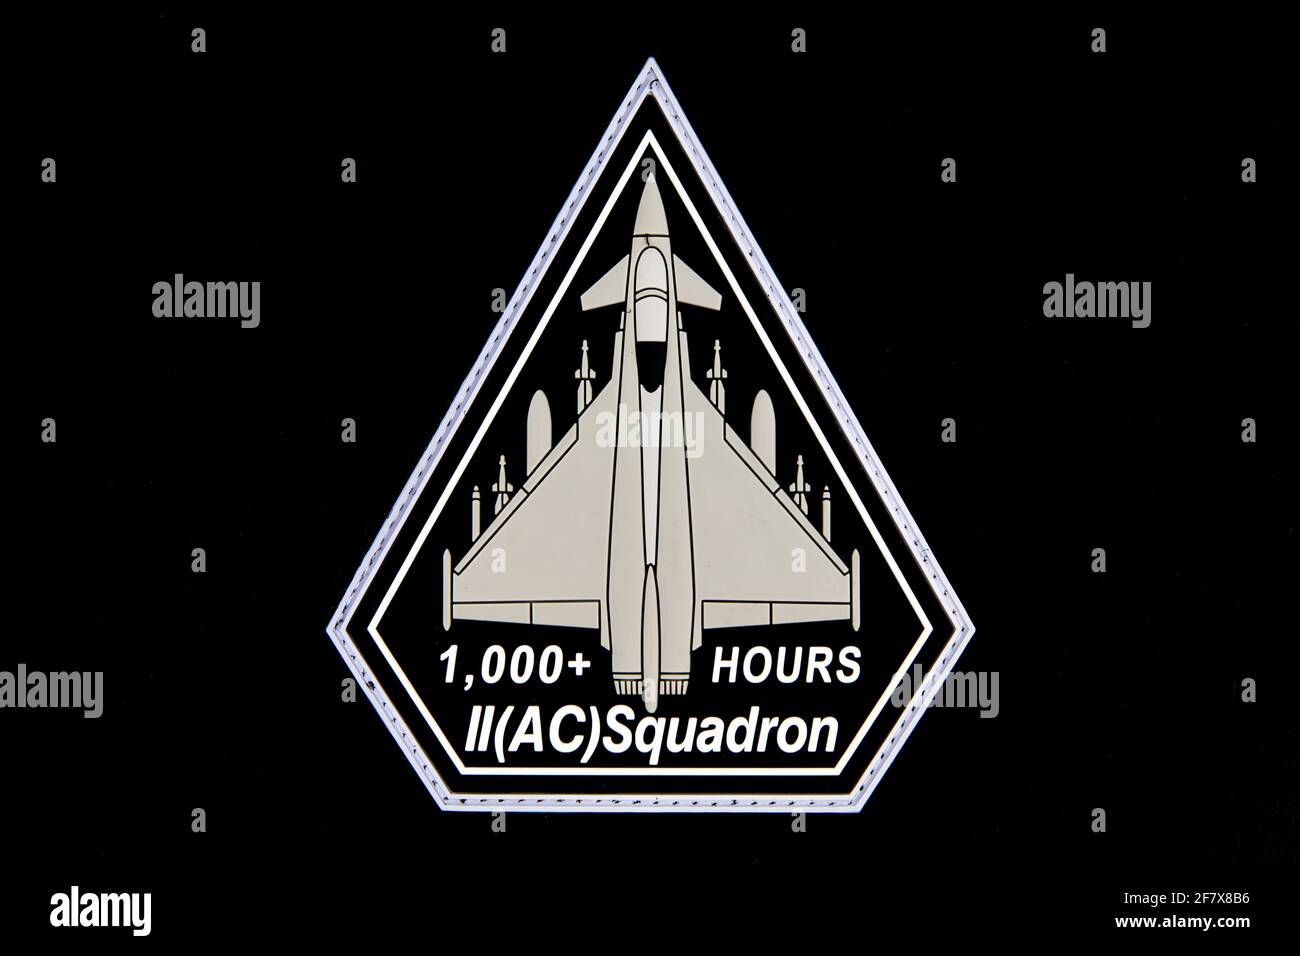 No. II (Army Co-operation) Squadron 1000+ hours PVC Patch Stock Photo